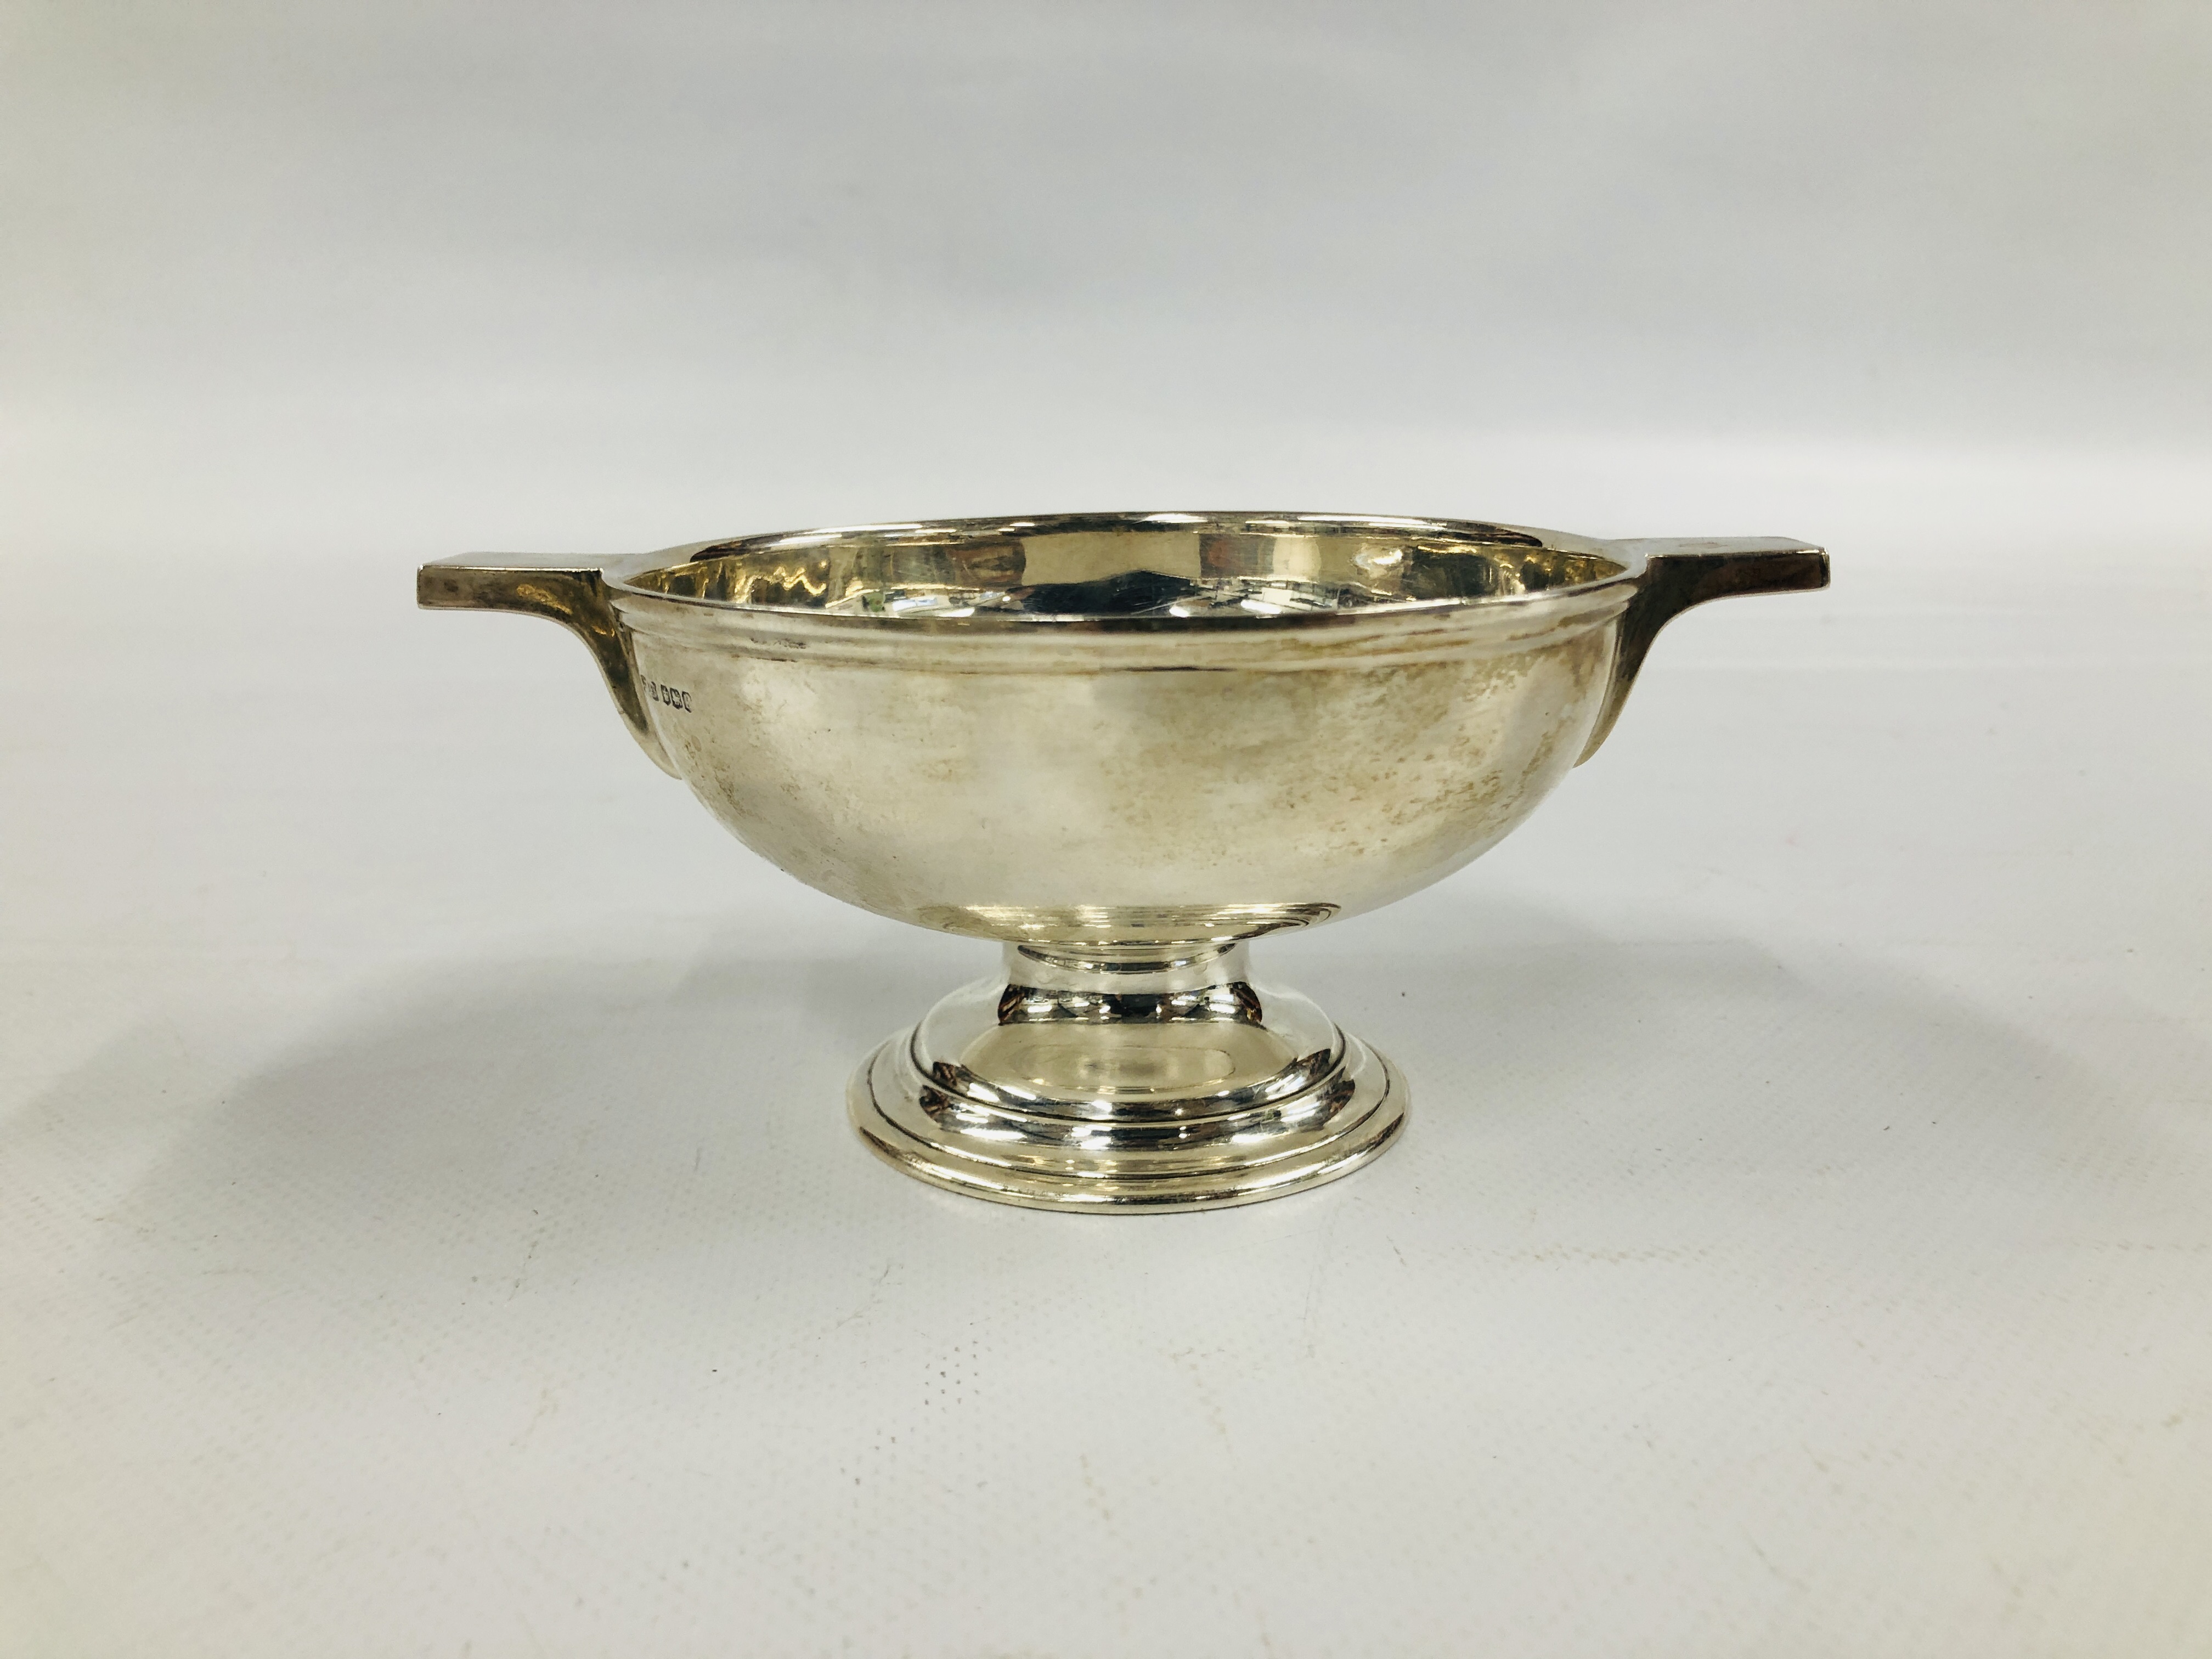 A SILVER FOOTED TWO HANDLED BOWL - BOWL DIAMETER 11.5CM.